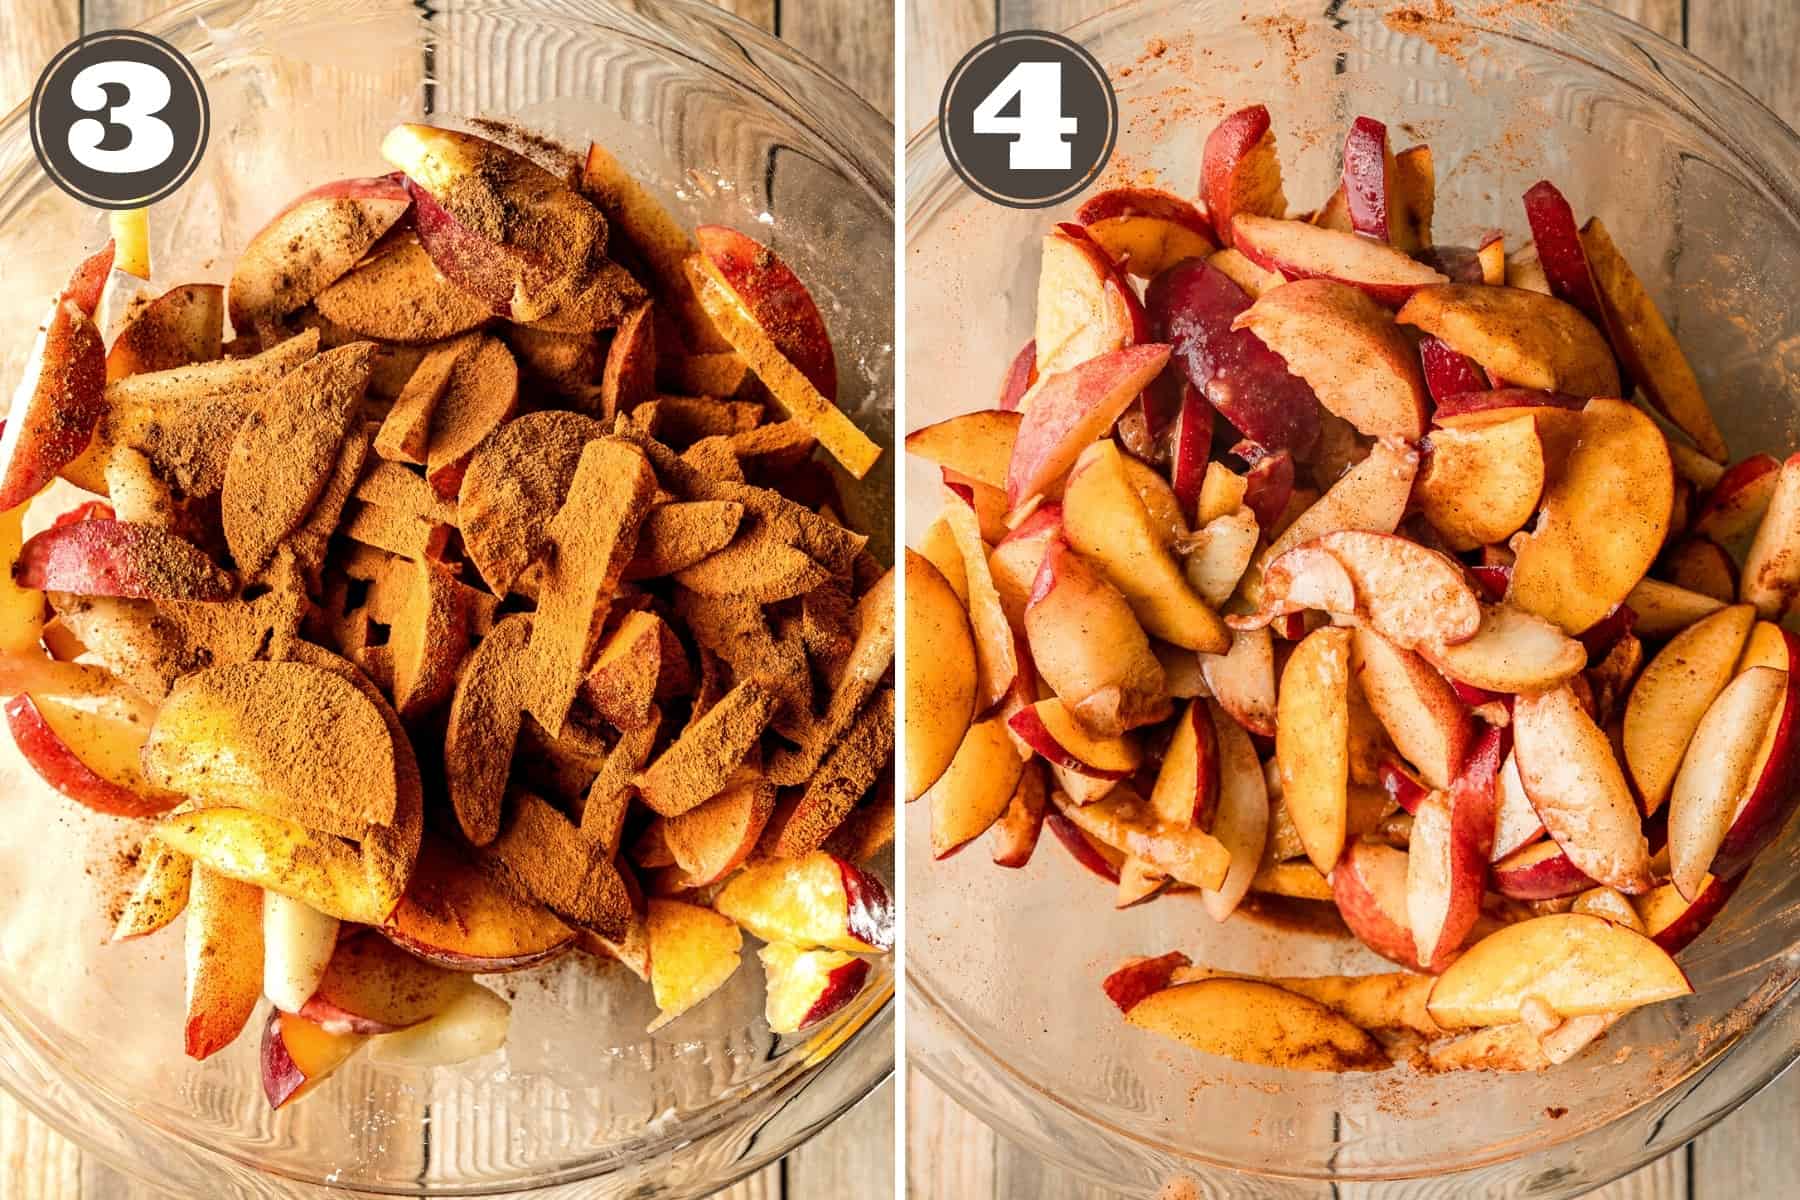 Side by side process photos showing sliced peached in a bowl mixed with all filling ingredients including cinnamon.